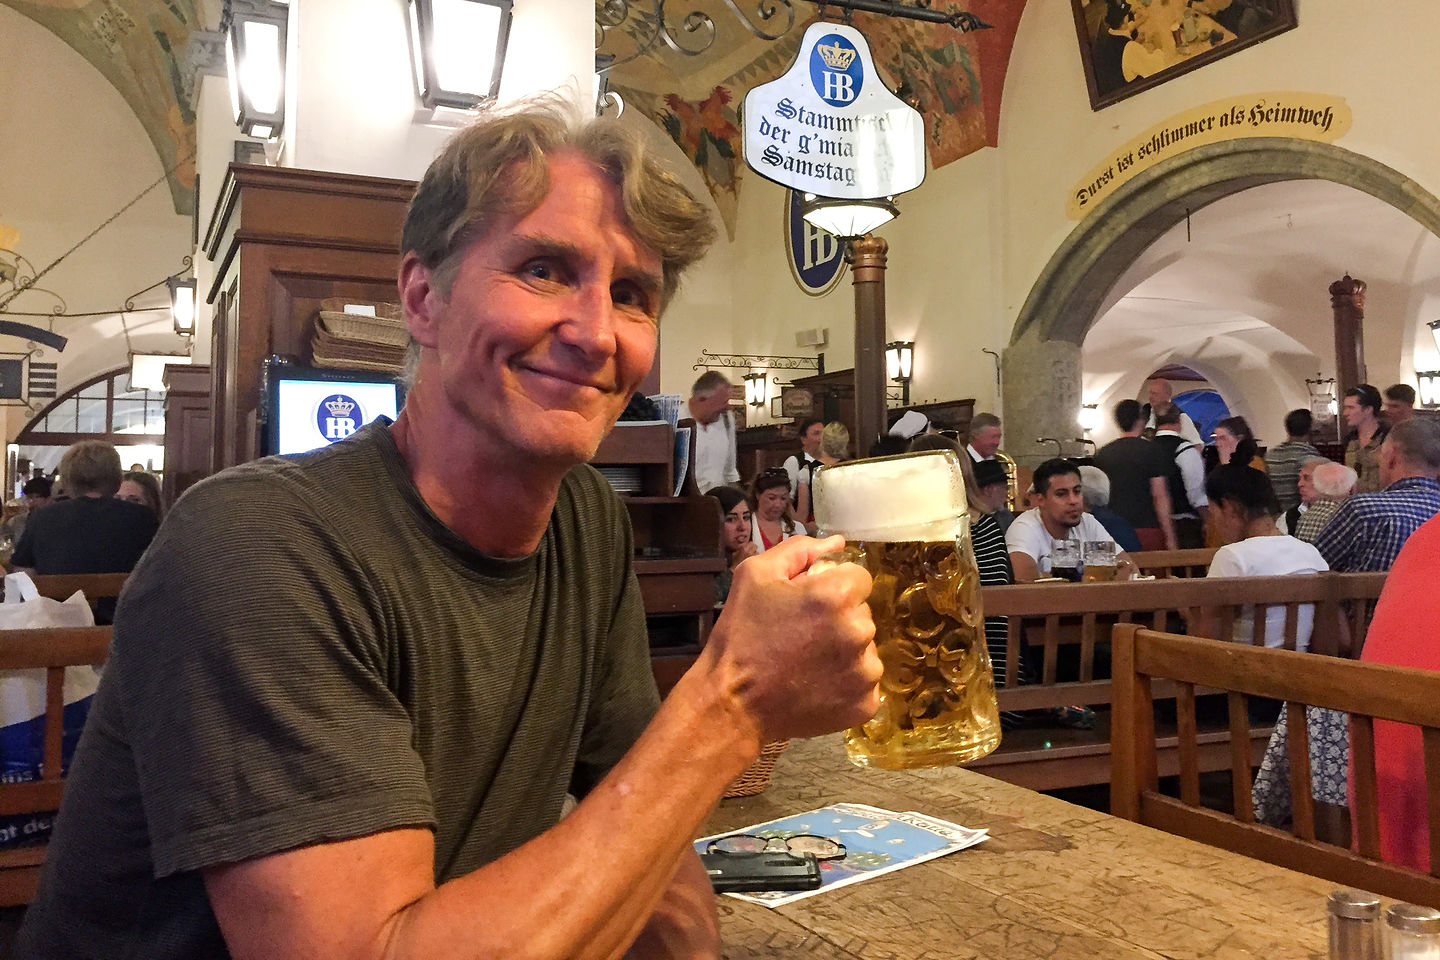 Herb enjoying another beer at the famous Hofbrauhaus